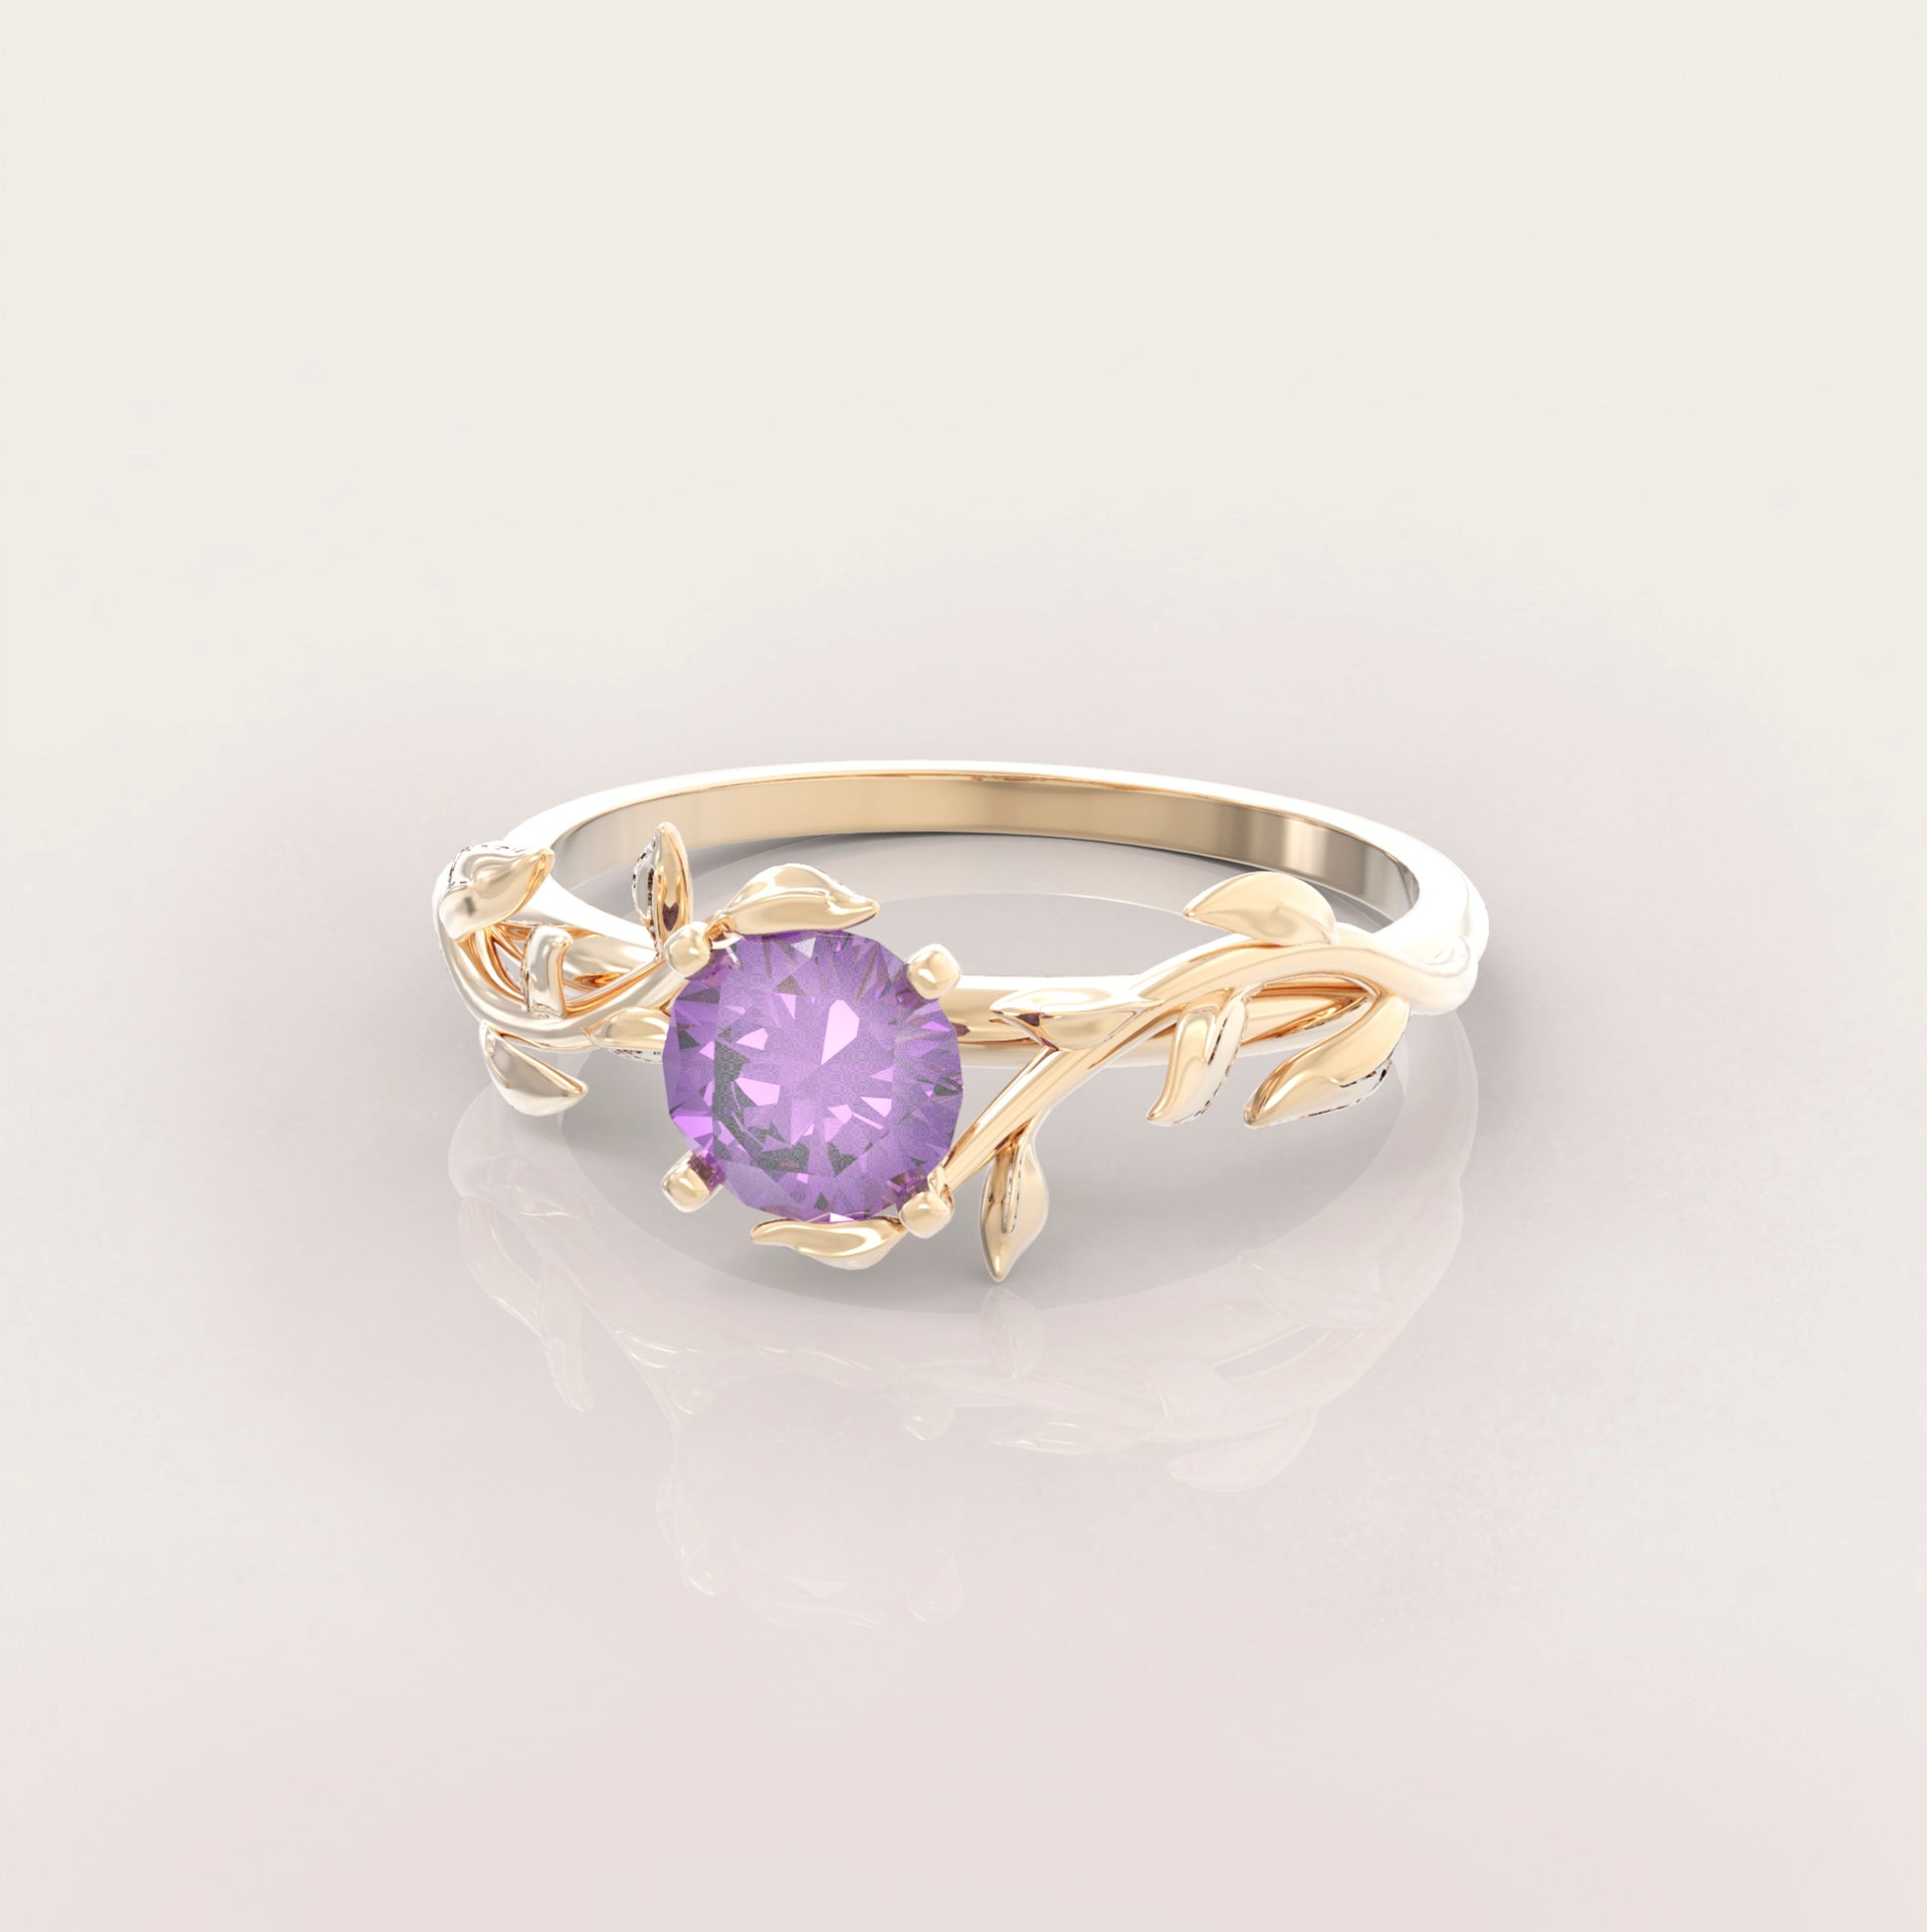 Unique Leaves Engagement Ring No.5 in Yellow Gold - Amethyst - Roelavi